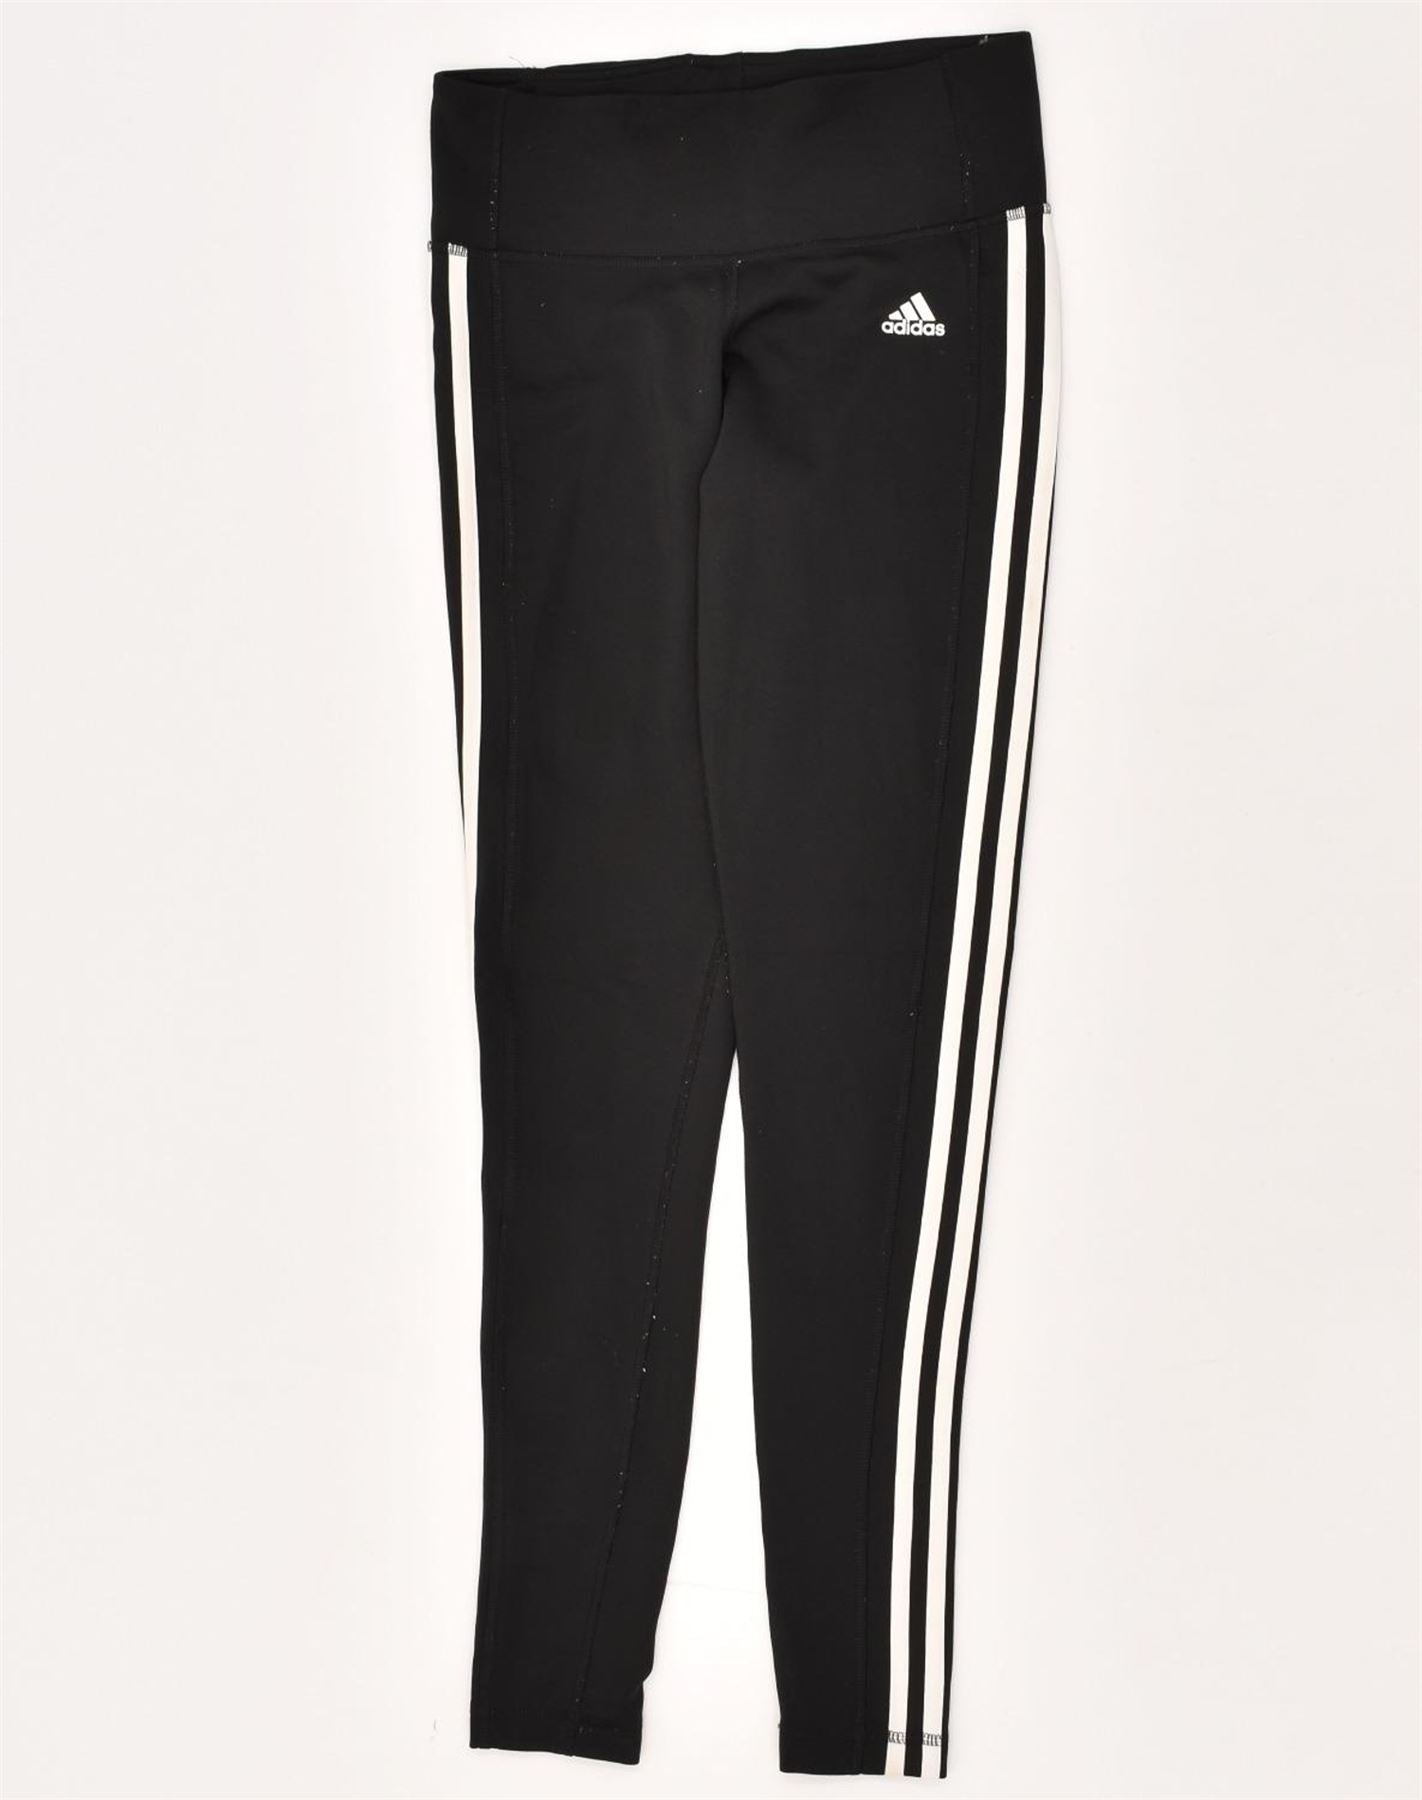 Full Length | Tight | Adidas | Tights & leggings | Womens sports clothing |  Sports & leisure | www.very.co.uk